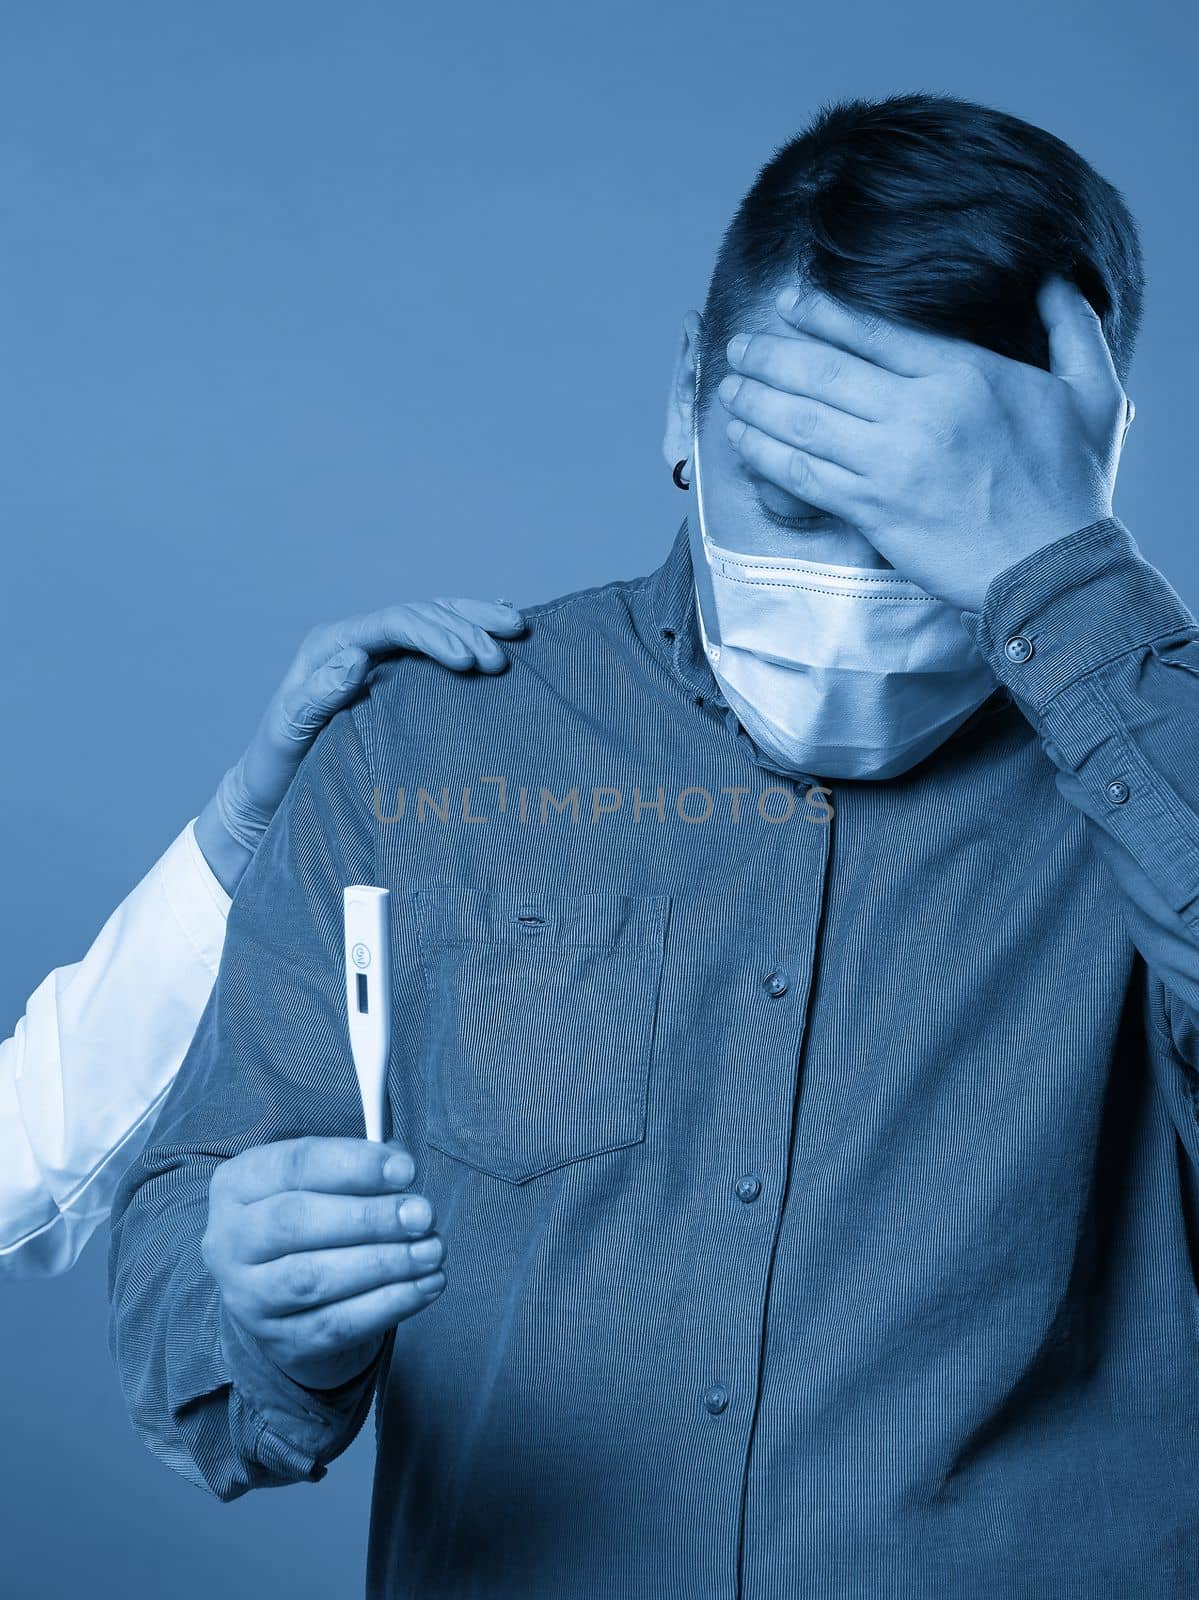 Young man in casual cloth wearing medical protective mask excited, stressed and frightened after read very high temperature result from digital thermometer